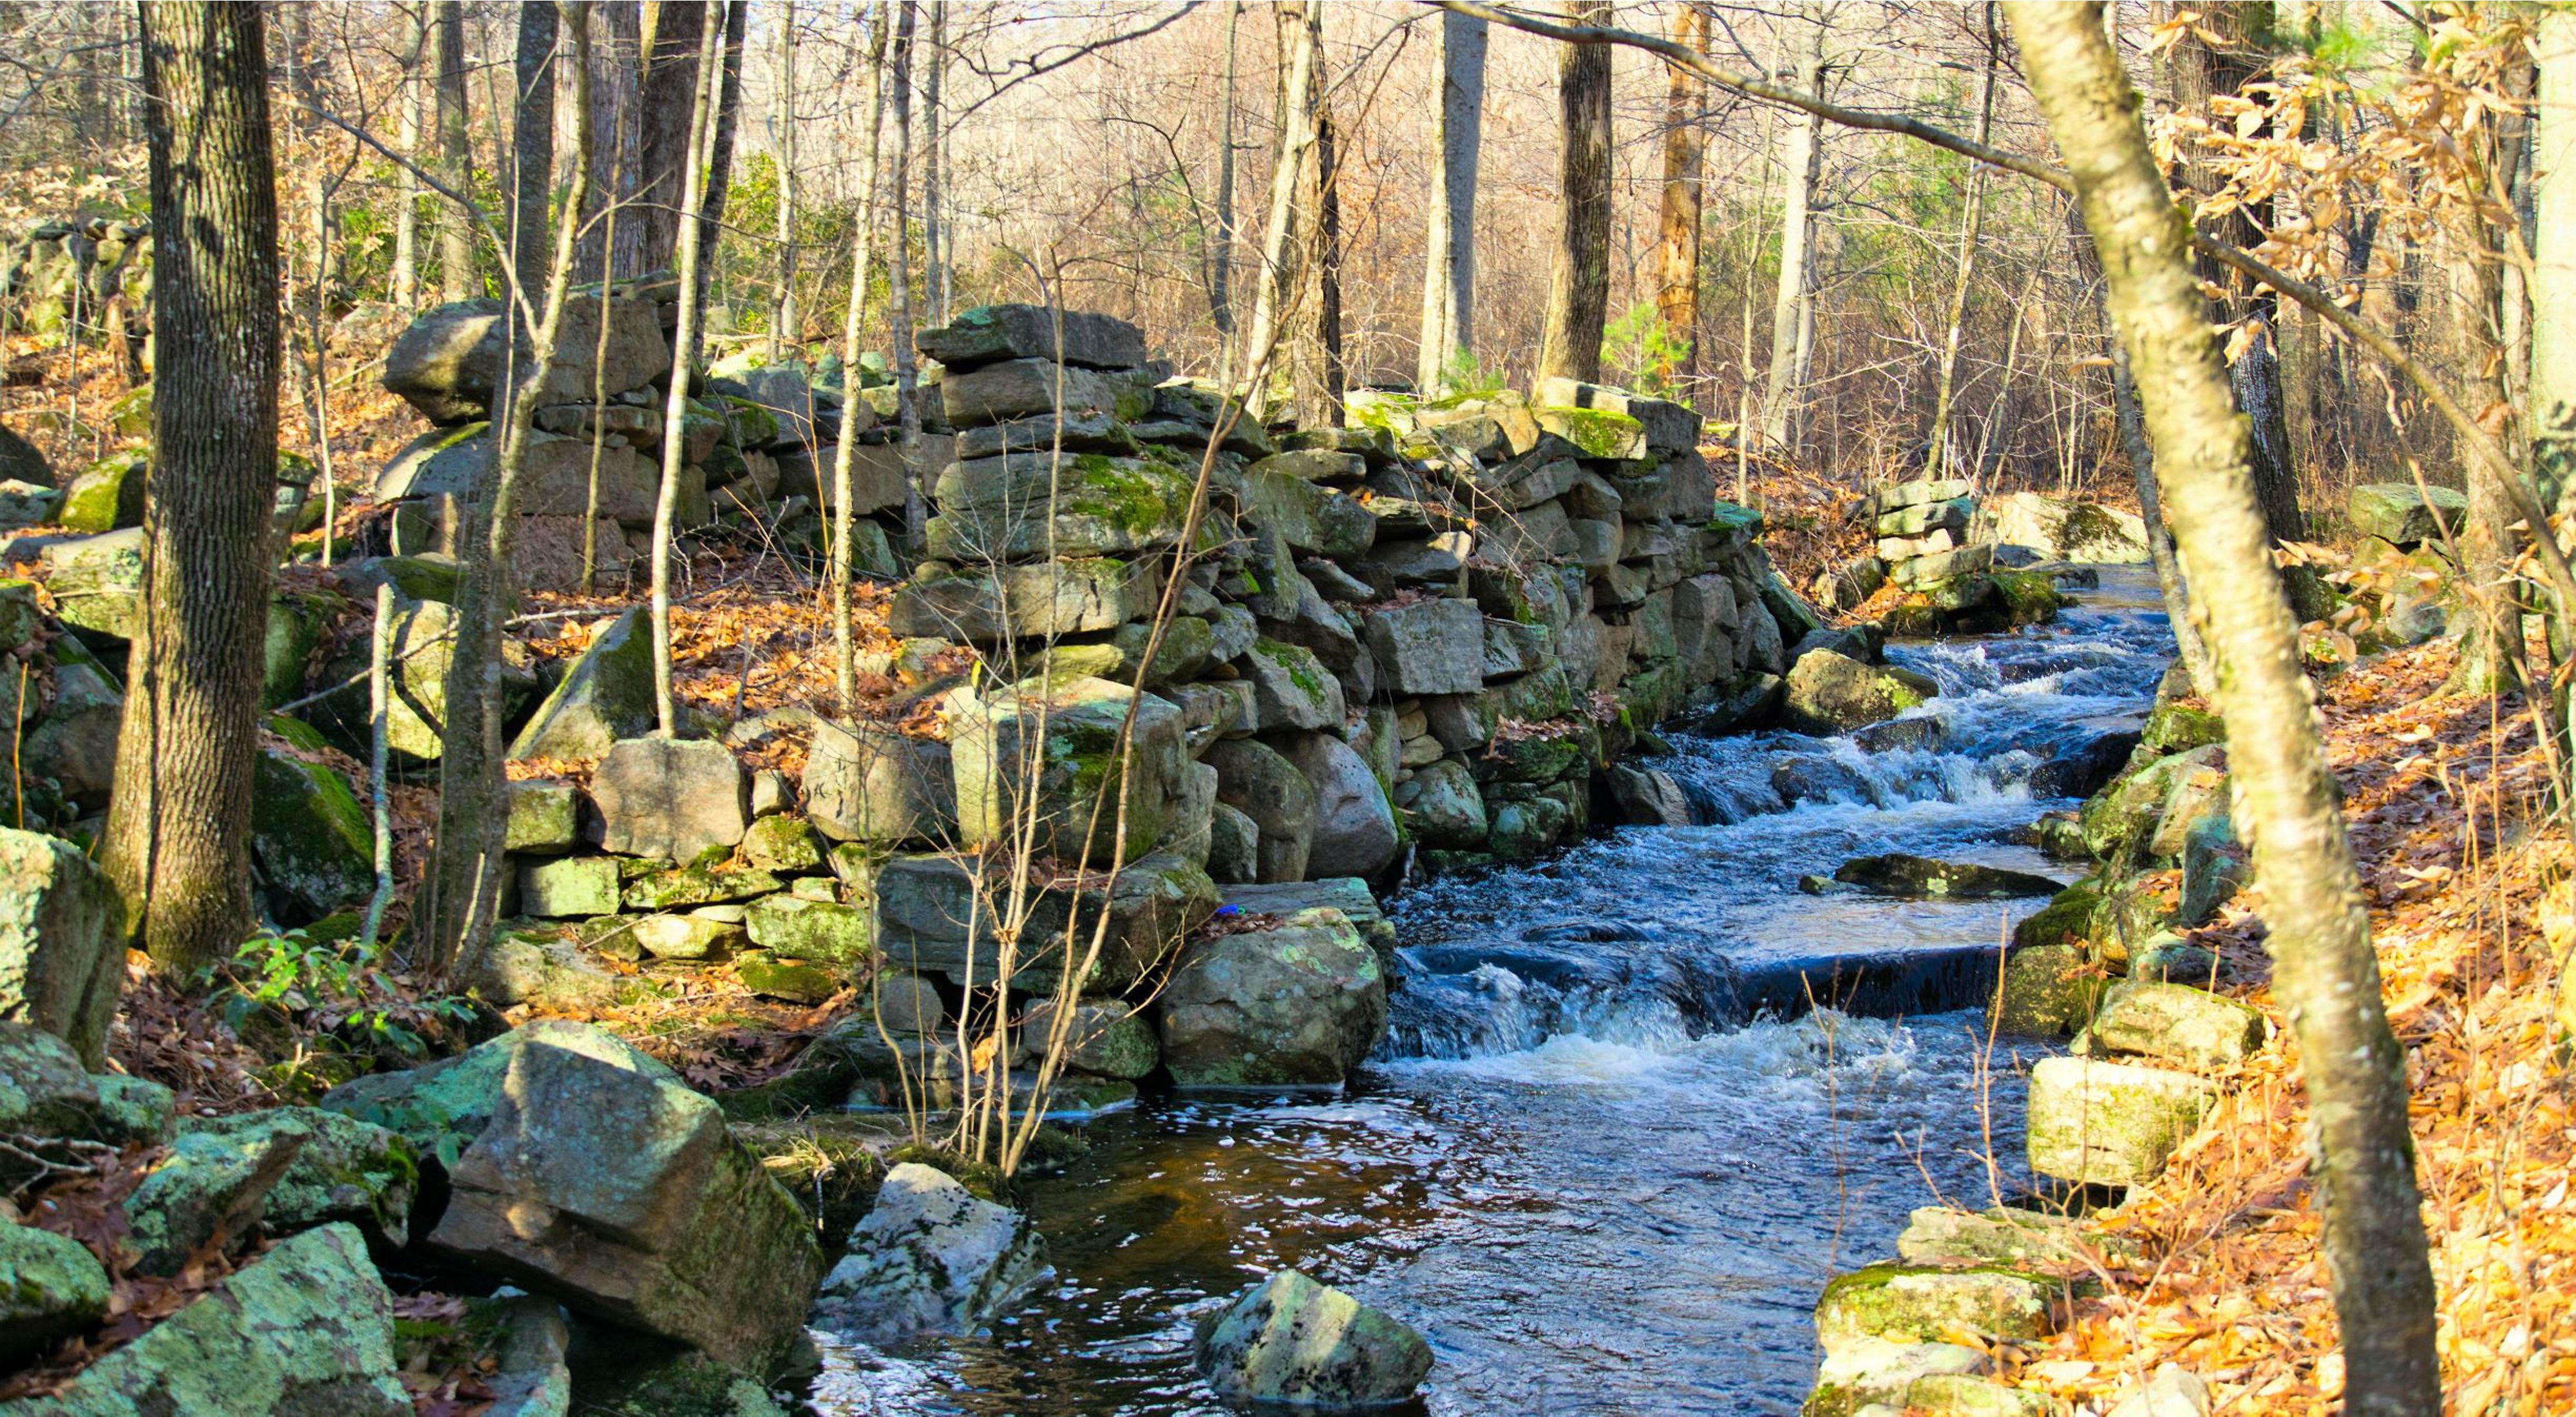 A small stream flows through the stone ruins of an old mill surrounded by forest.